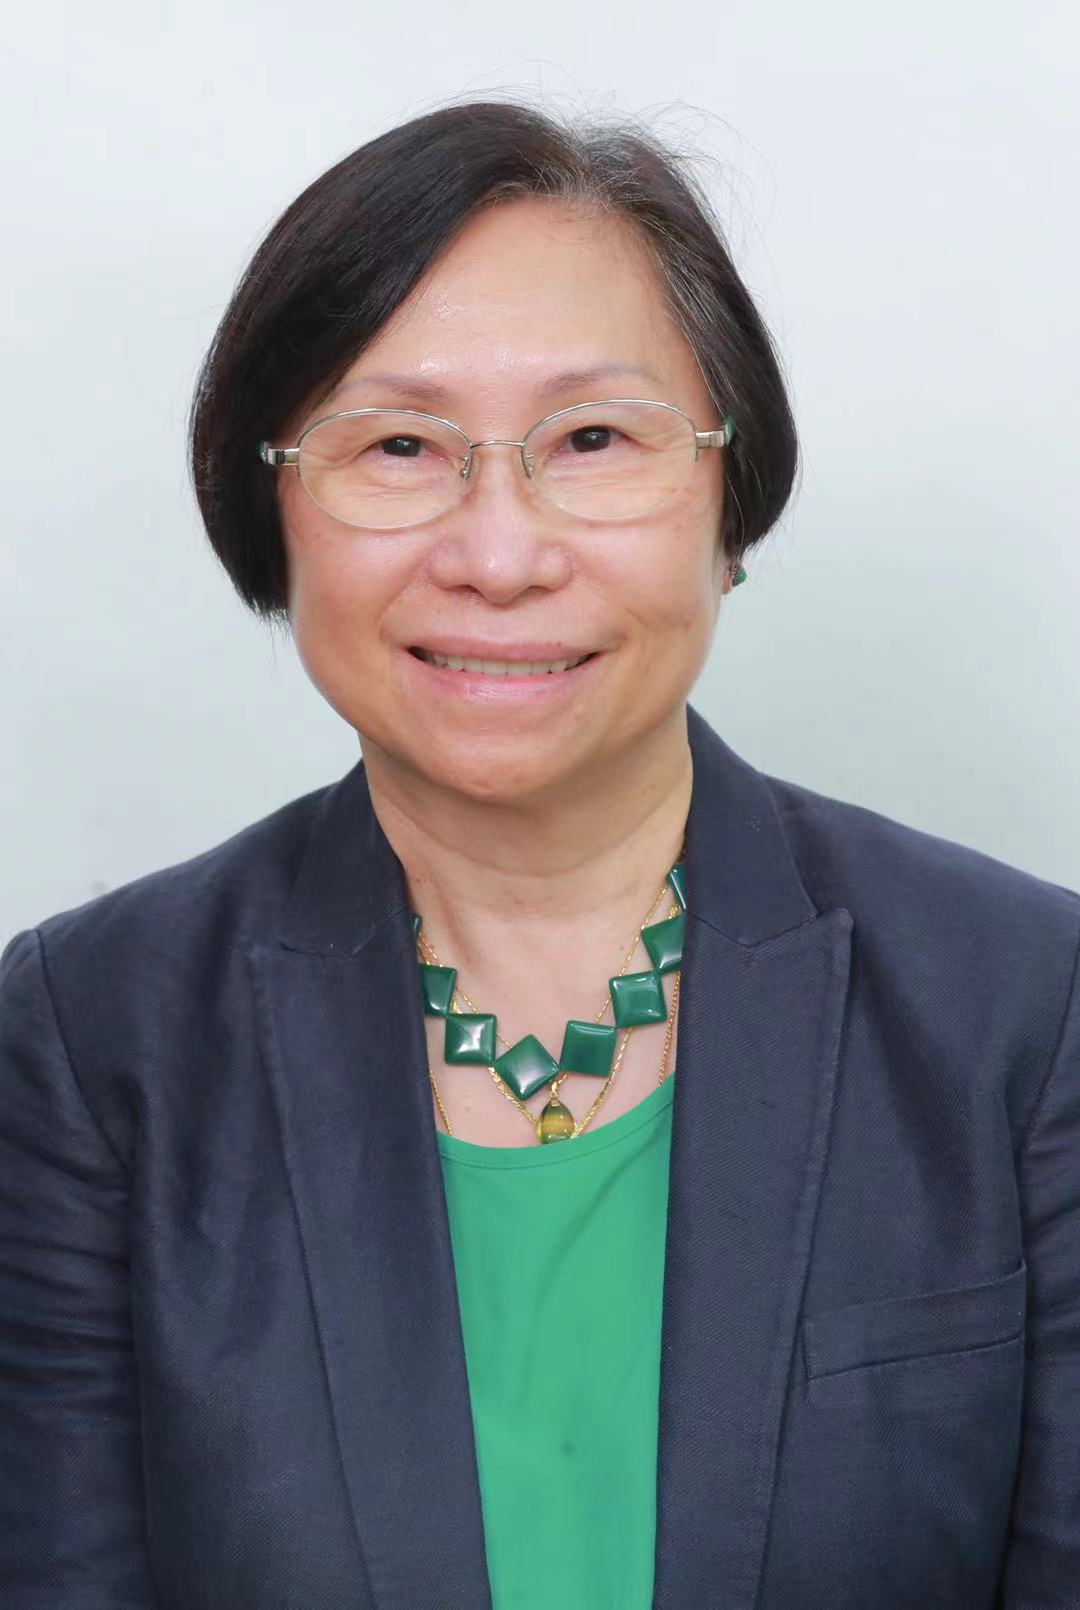 Dr. Lam Nogueira Oi Ching Bernice